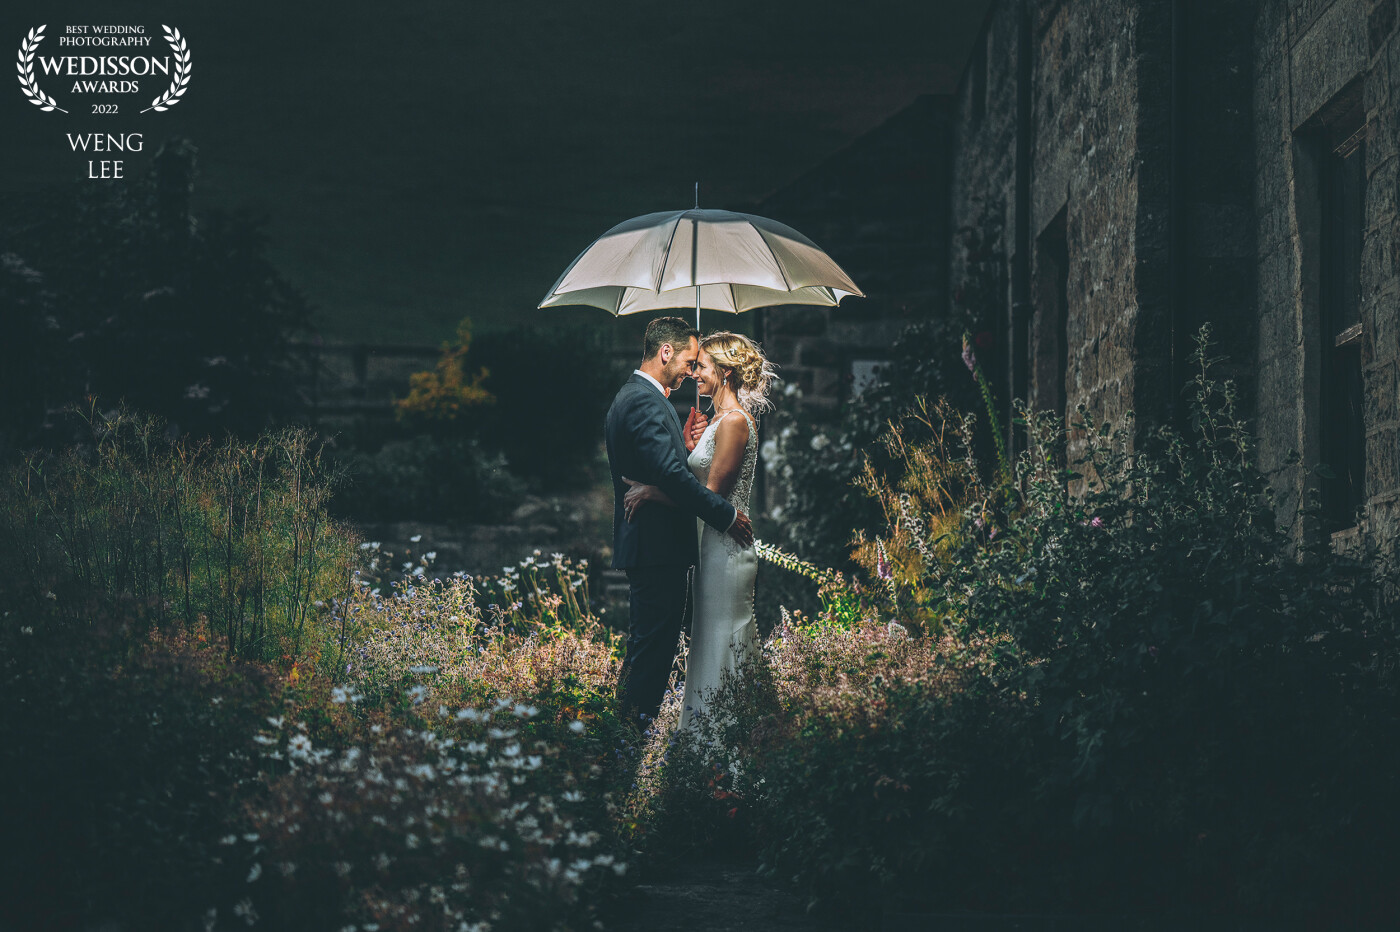 When night fall, plenty magical lights hidden and depending how you want it be led up using flash etc. <br />
Perfection when couple say yes to out while light rain.